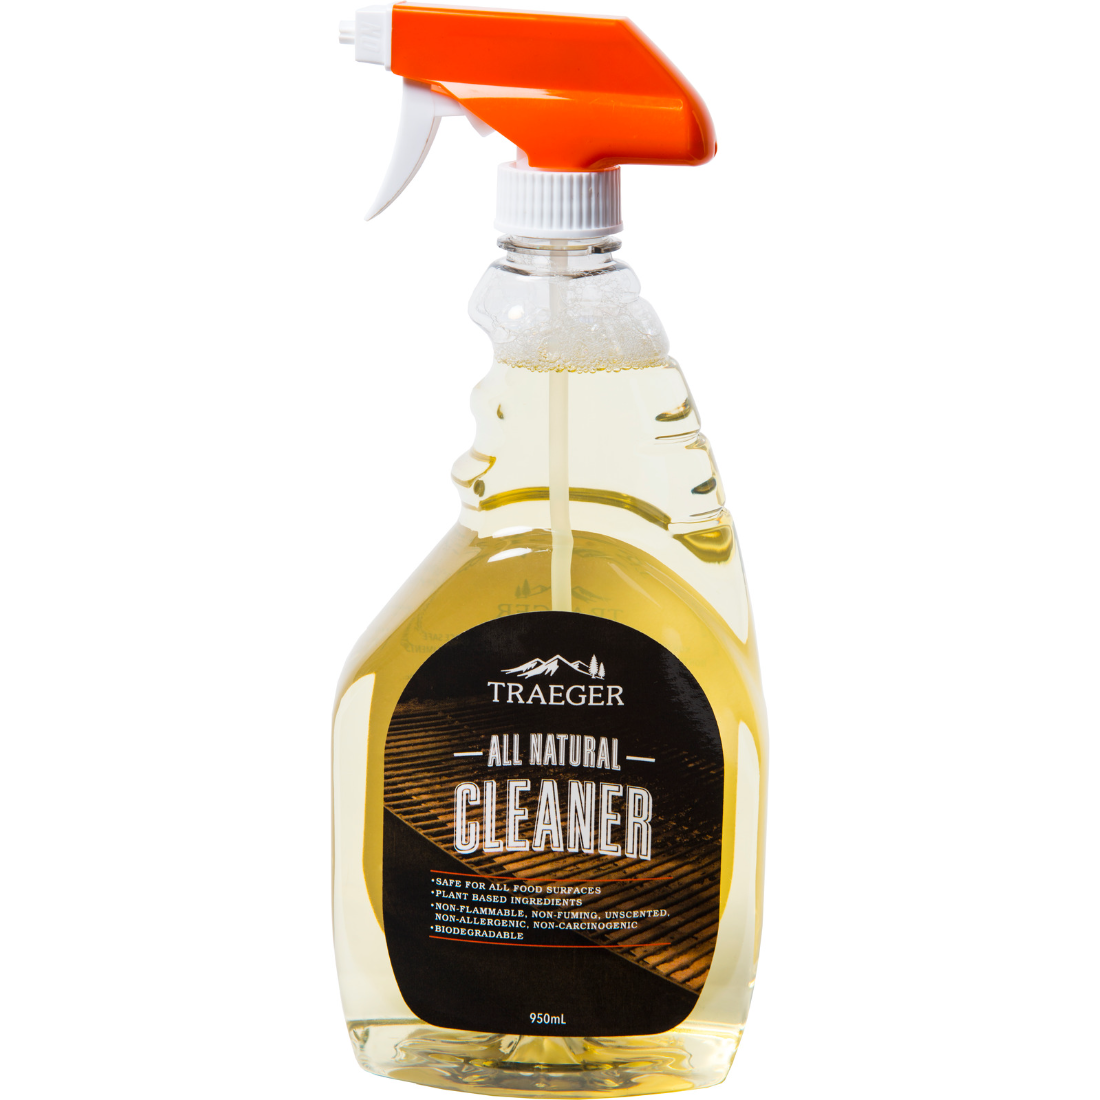 /assets/images/products/product-images/DFFWMEBWK6BPR/64aa1c224065d_traeger_cleaner.png